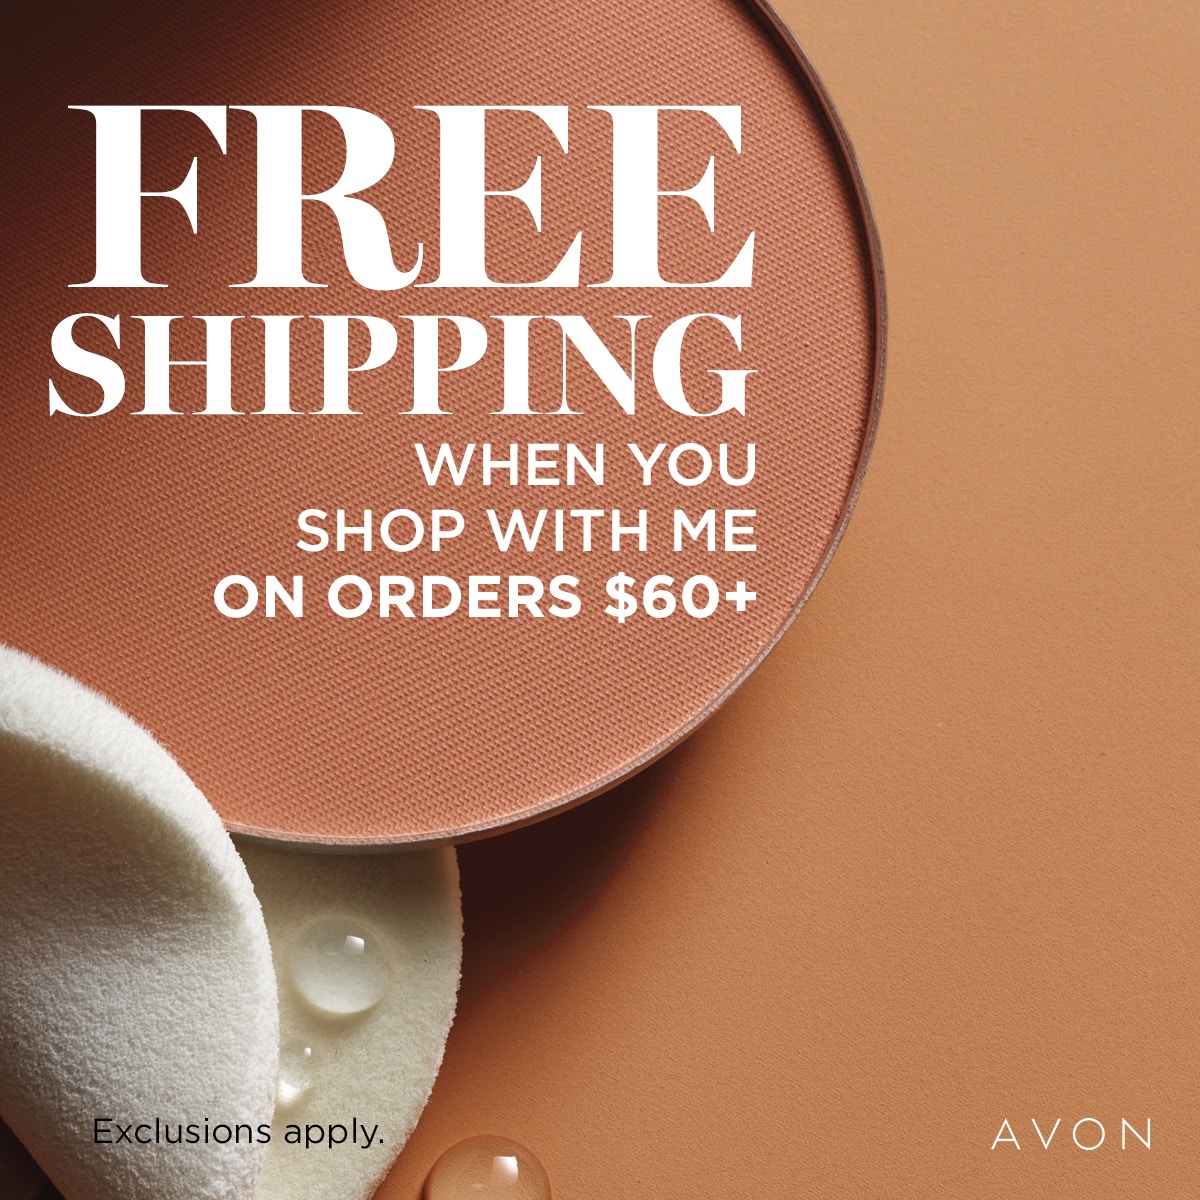 Enjoy free shipping on all online orders over $60! I have more stuff in my store than in the book check it out! go.youravon.com/3nncsd #freeshipping #lovemybeauty #shopshopshop